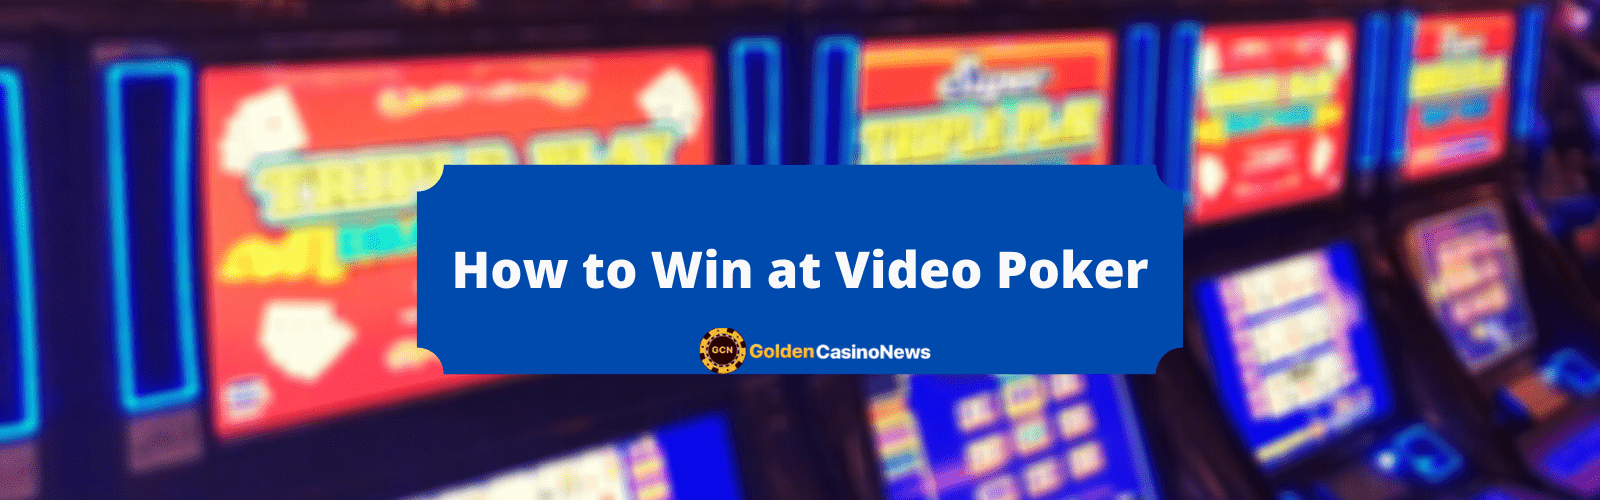 How to Win at Video Poker